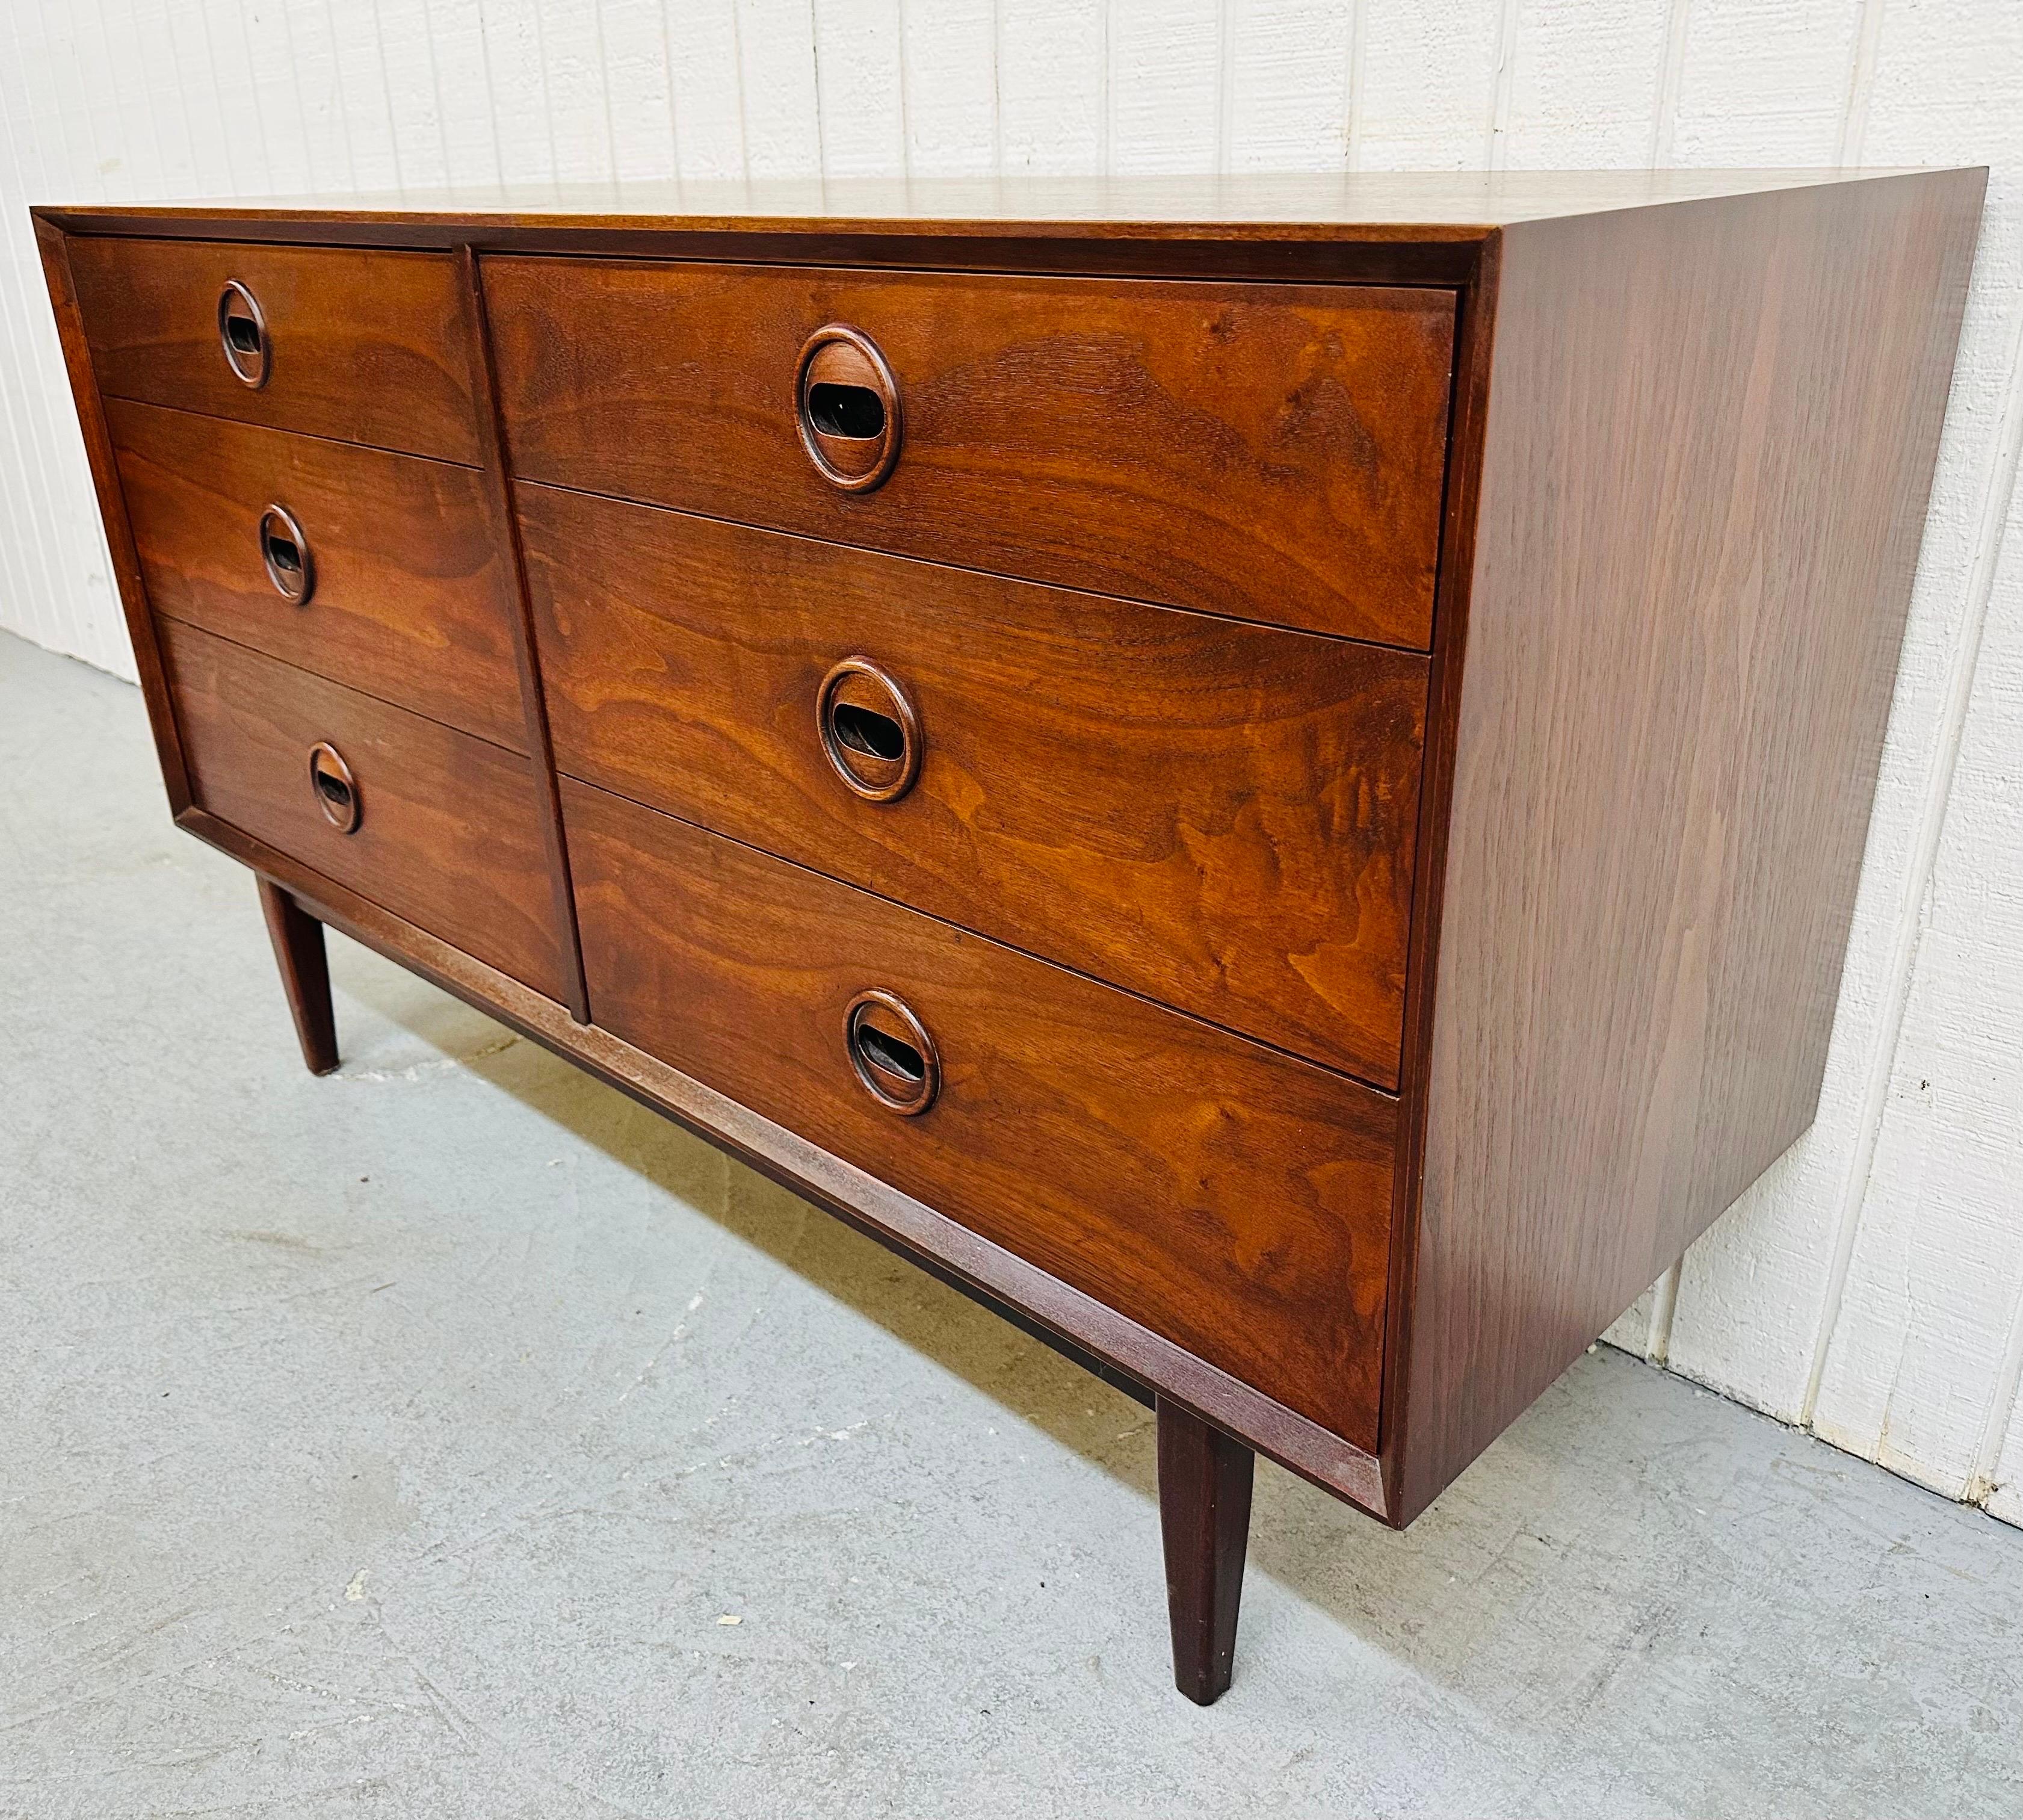 This listing is for a Mid-Century Modern Walnut Dresser attributed to designer Jack Cartwright. Featuring six drawers for storage, round sculpted walnut pulls, and a beautiful walnut finish. This is an exceptional combination of quality and design.